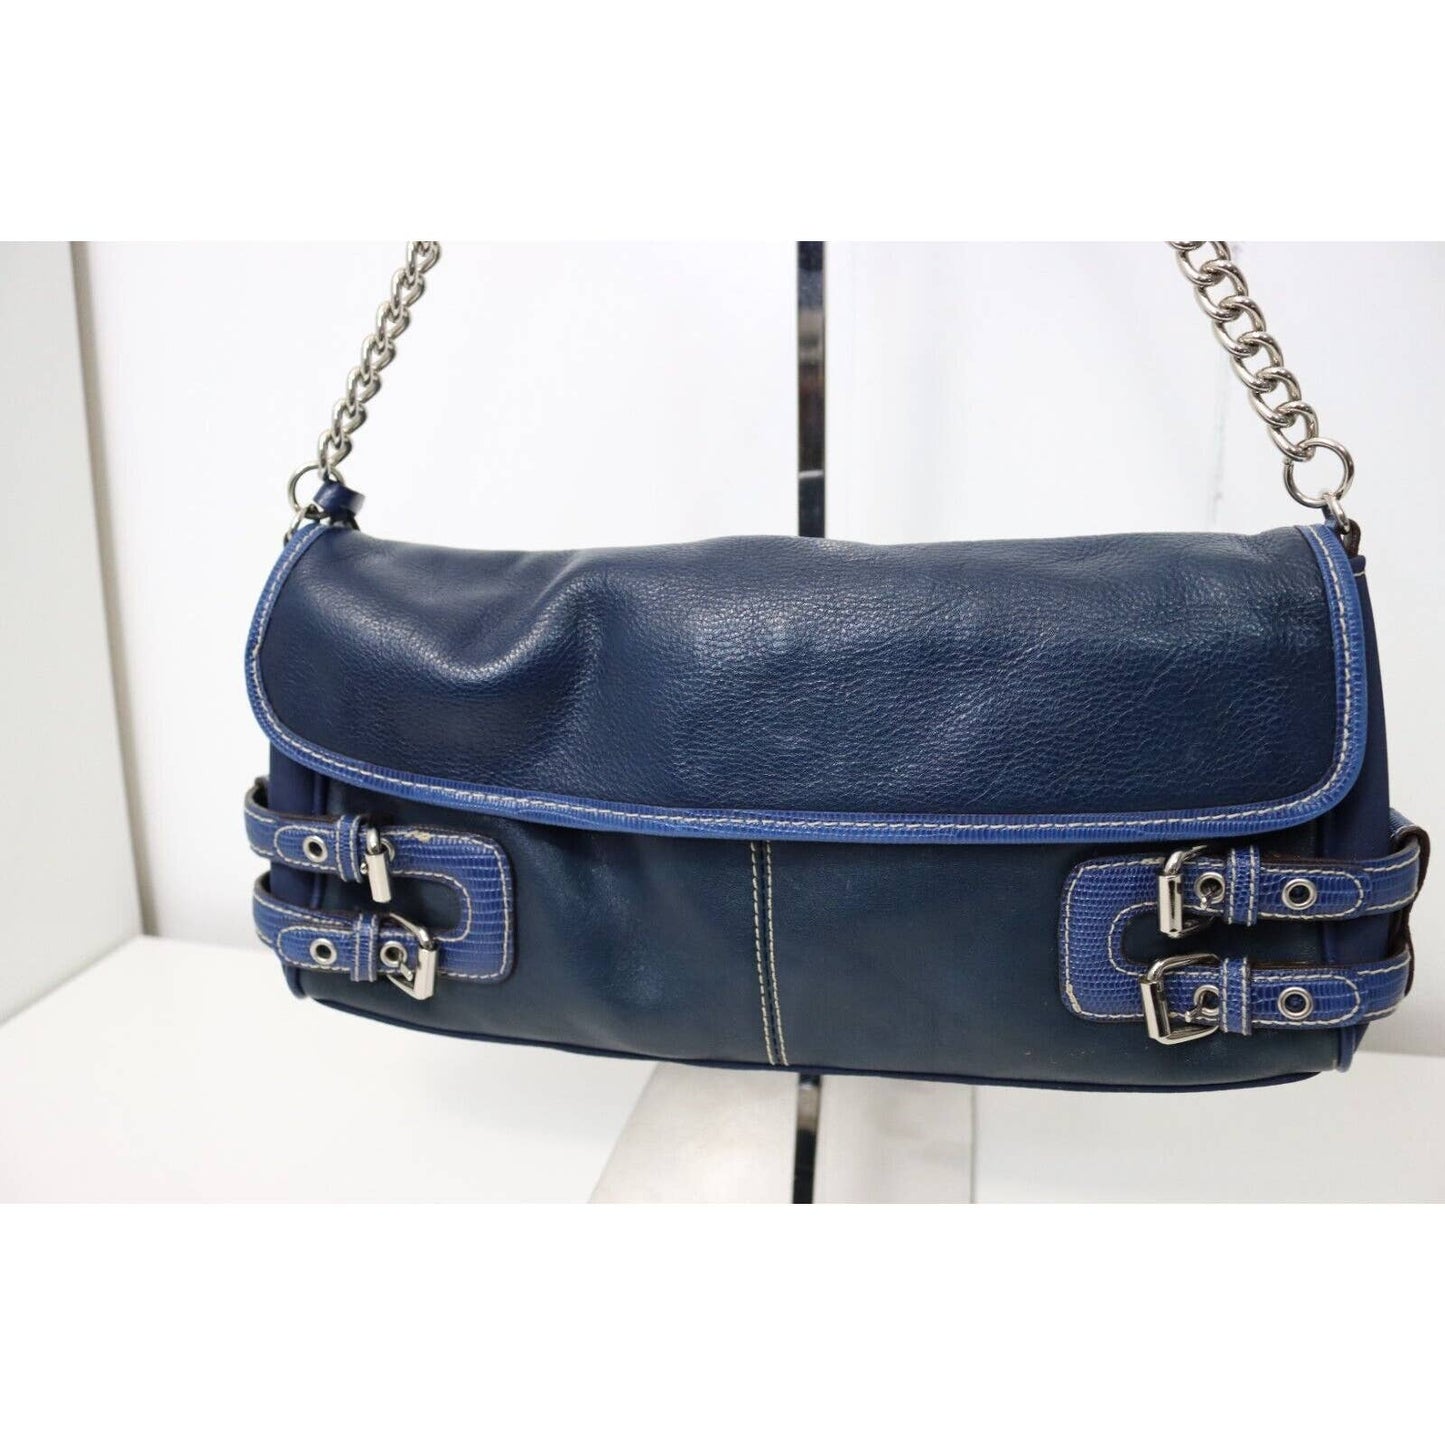 Franco Sarto Blue Leather Purse with a distinctive buckle design and a chic chain on the strap